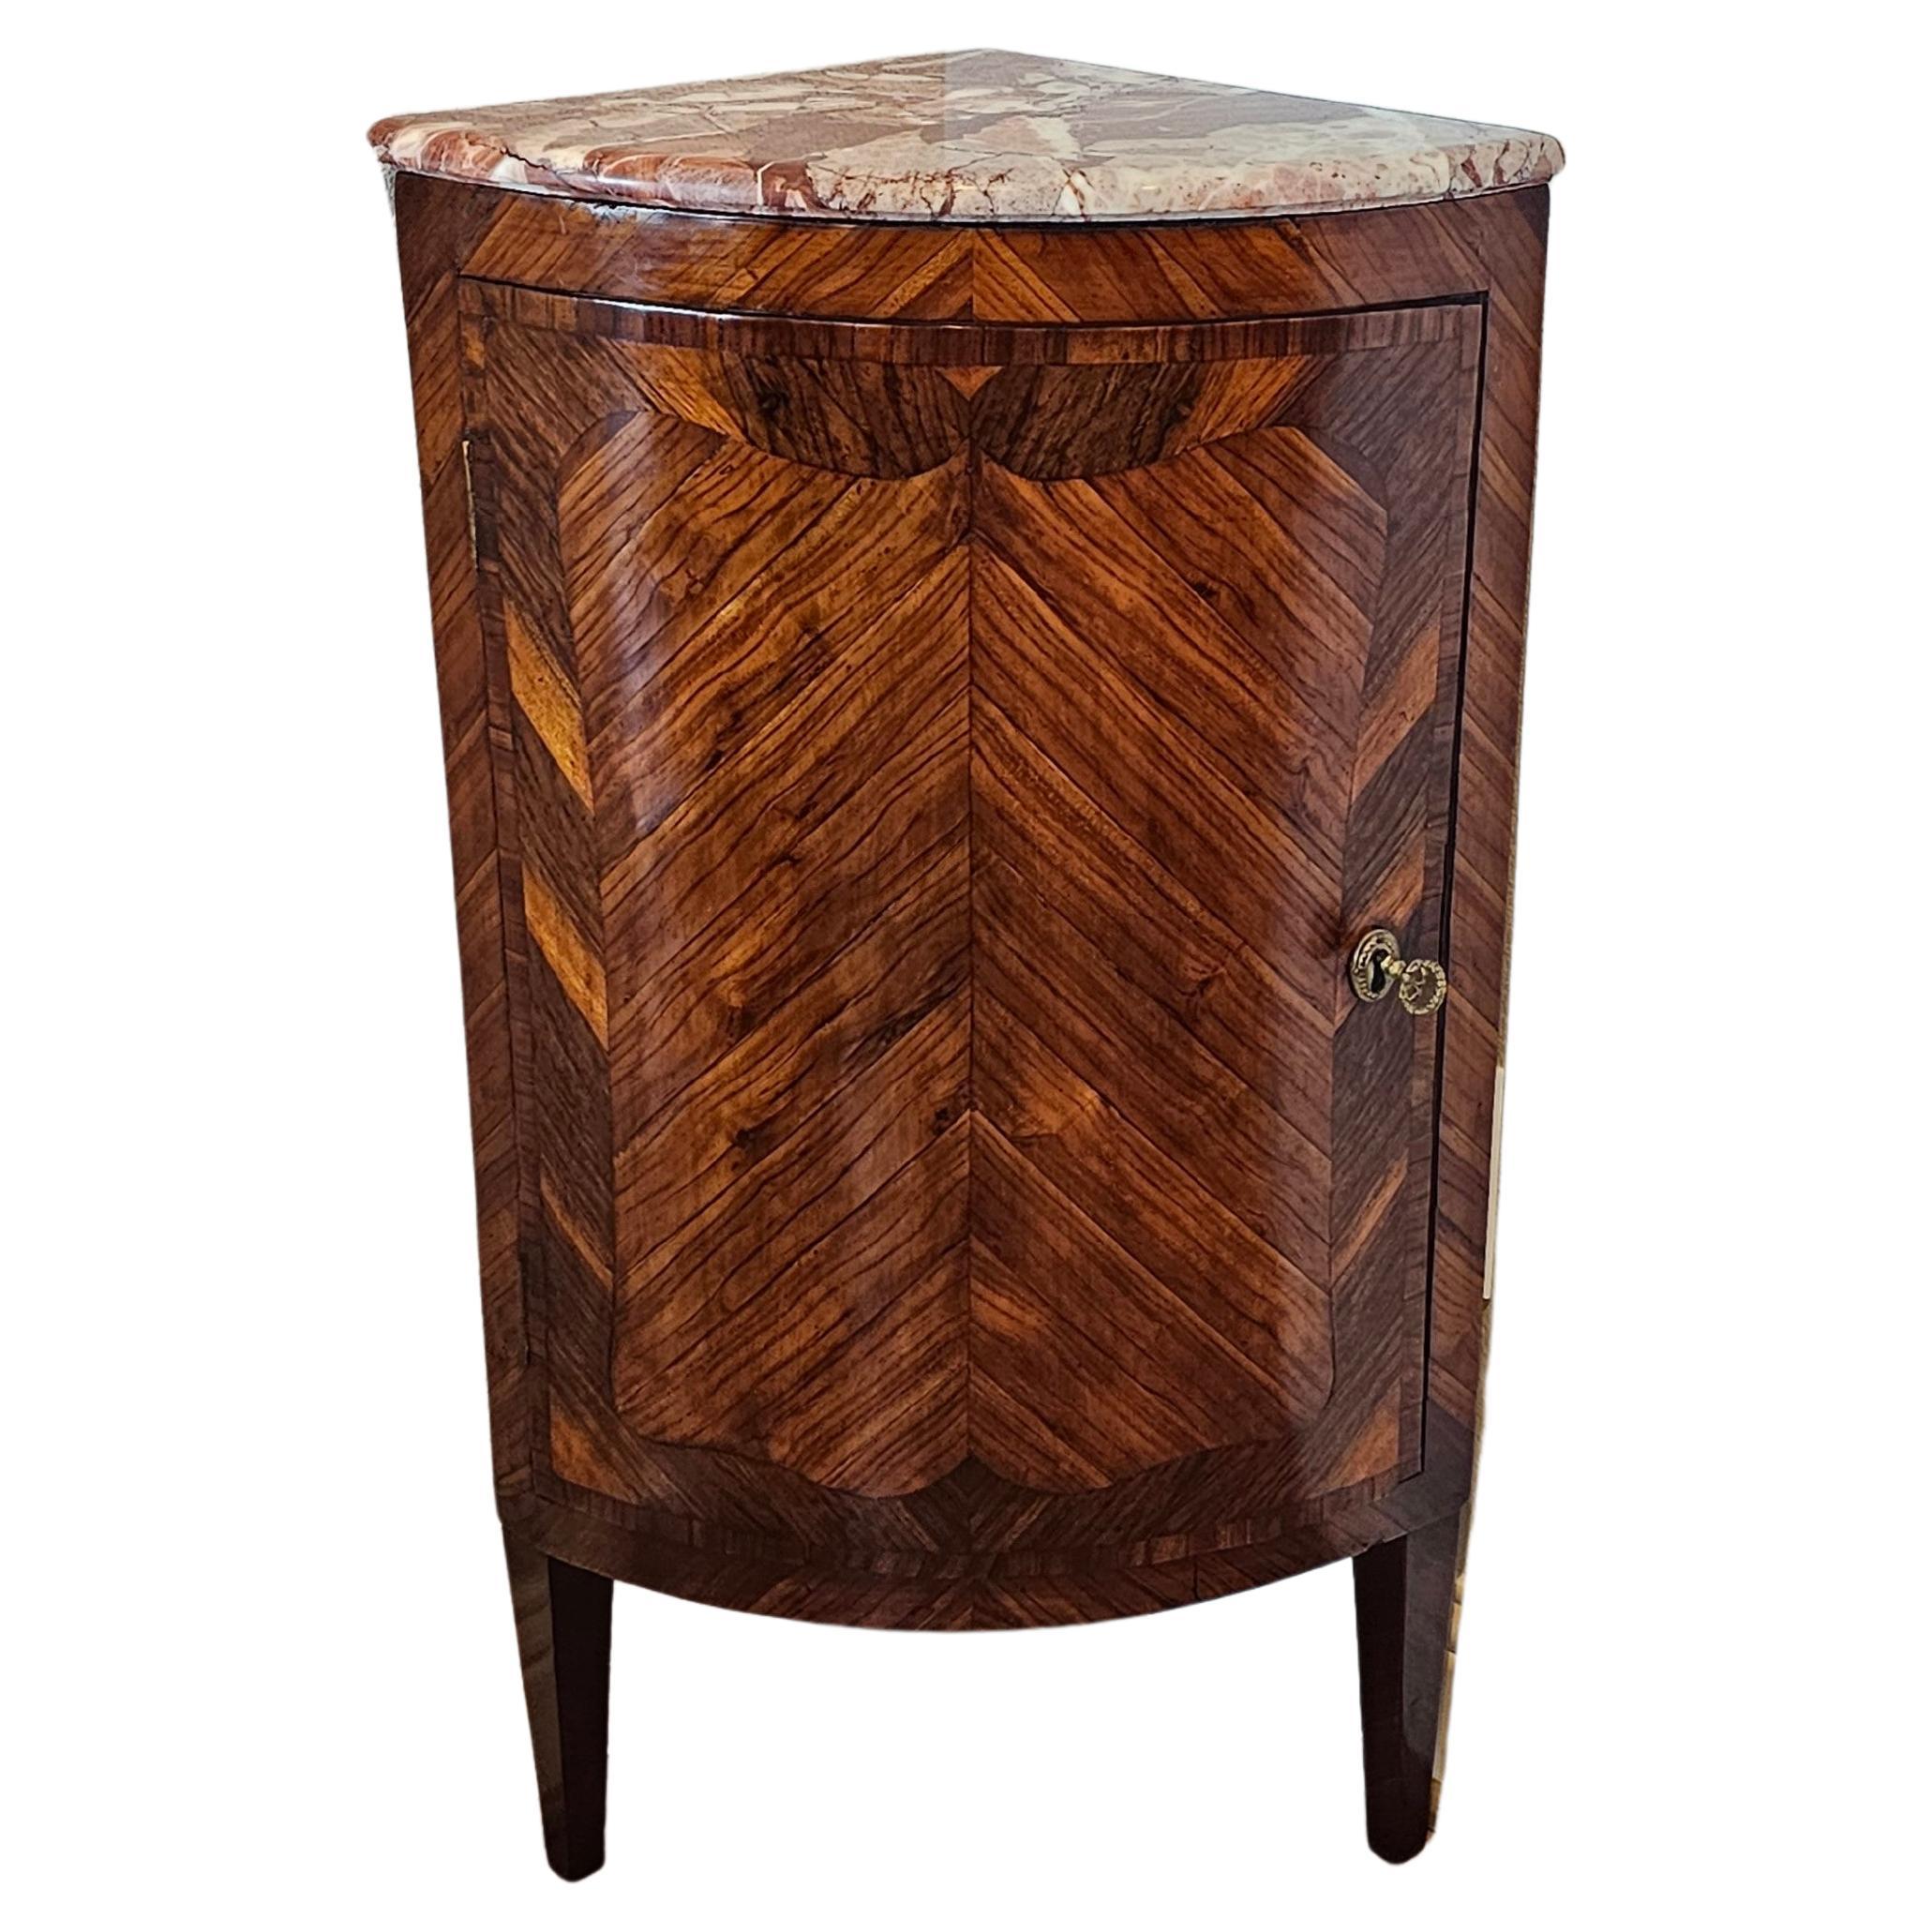 19th Century Italian Matched Kingwood Tulipwood Marble Top Corner Cabinet  For Sale